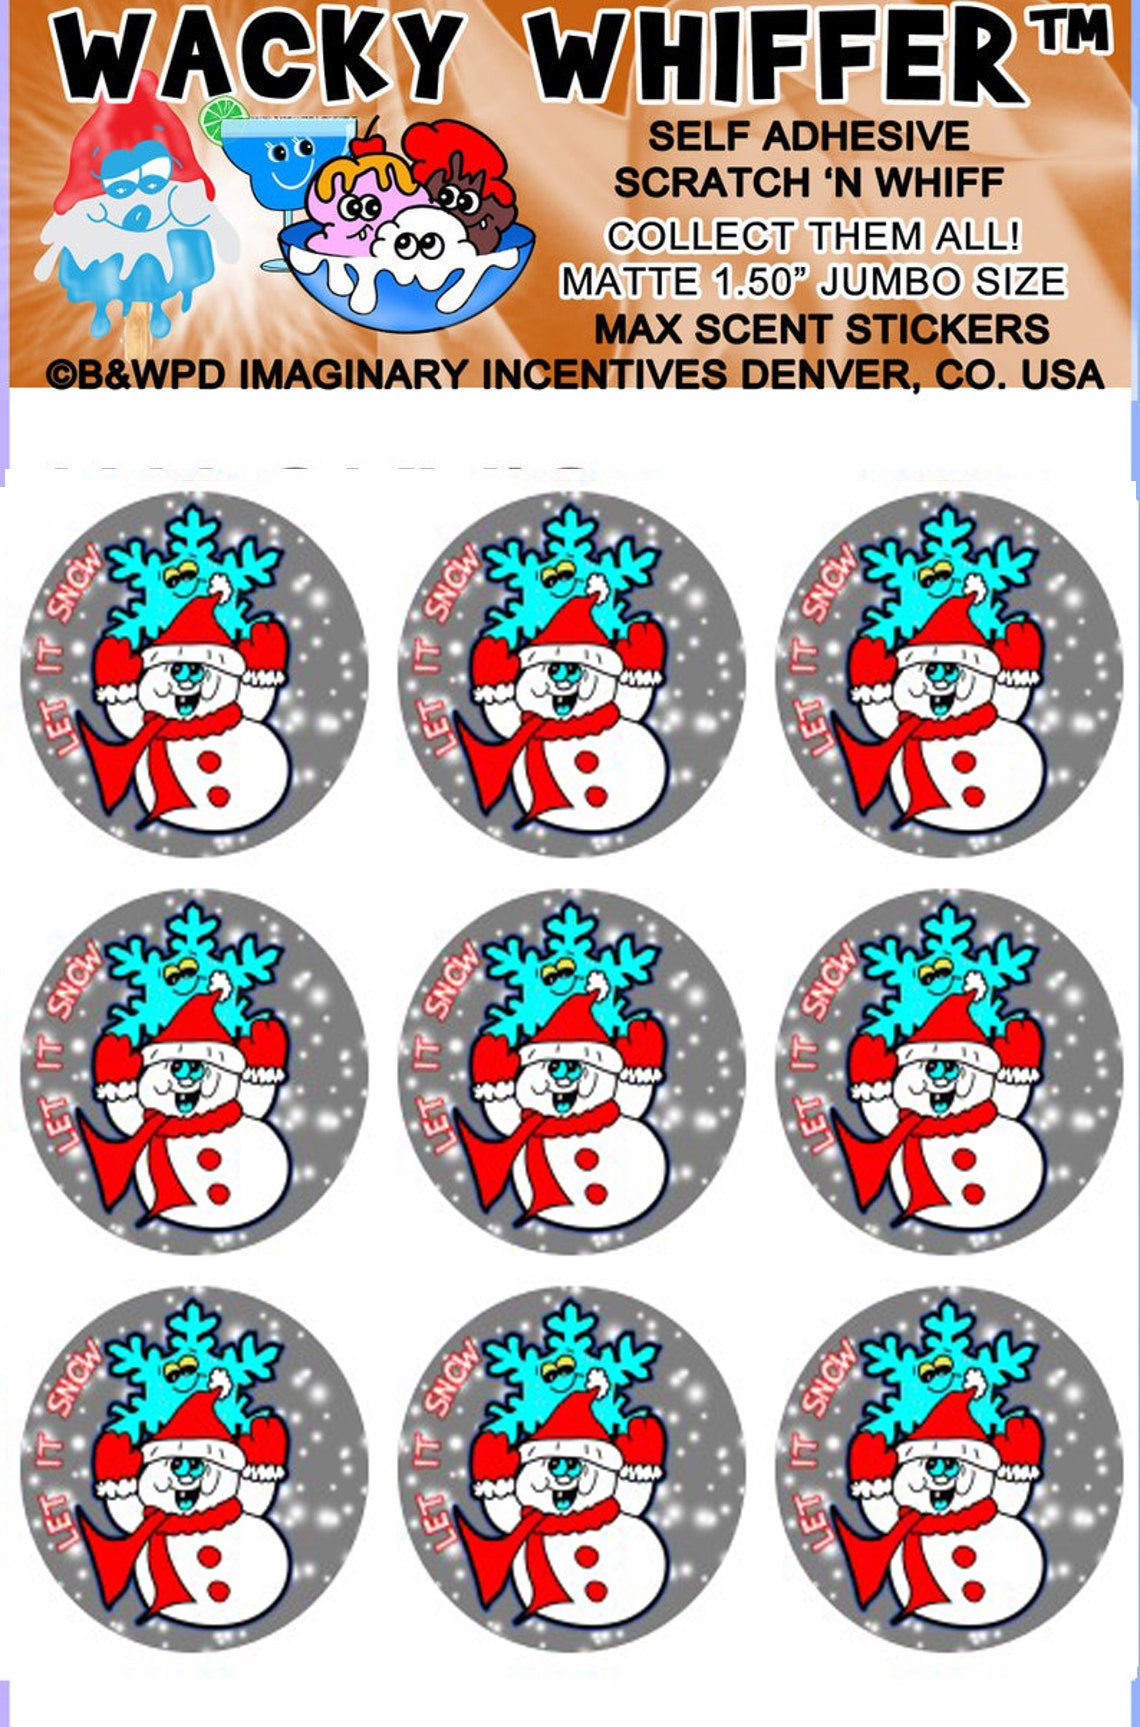 WACKY WHIFFER MAX Scent Matte Jumbo Size Scratch and Sniff Stickers Snow Ice Cream Max Scent Matte Stickers Christmas 2021 Snowflake